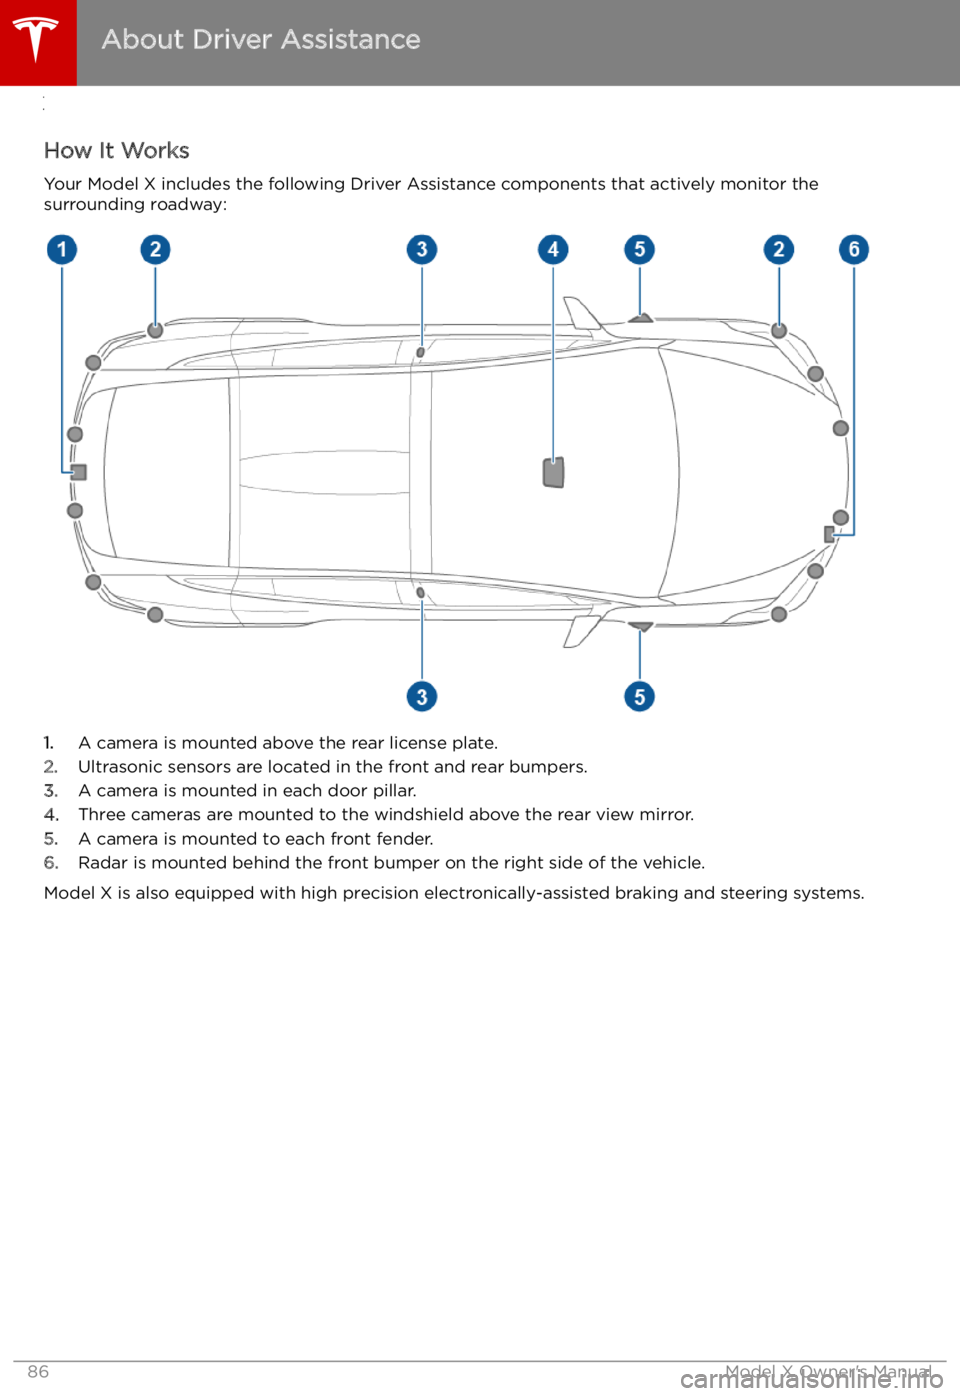 TESLA MODEL X 2021  Owner´s Manual Driver Assistance
About Driver Assistance
How It Works Your Model X includes the following Driver Assistance components that actively monitor the
surrounding roadway:
1. A camera is mounted above the 